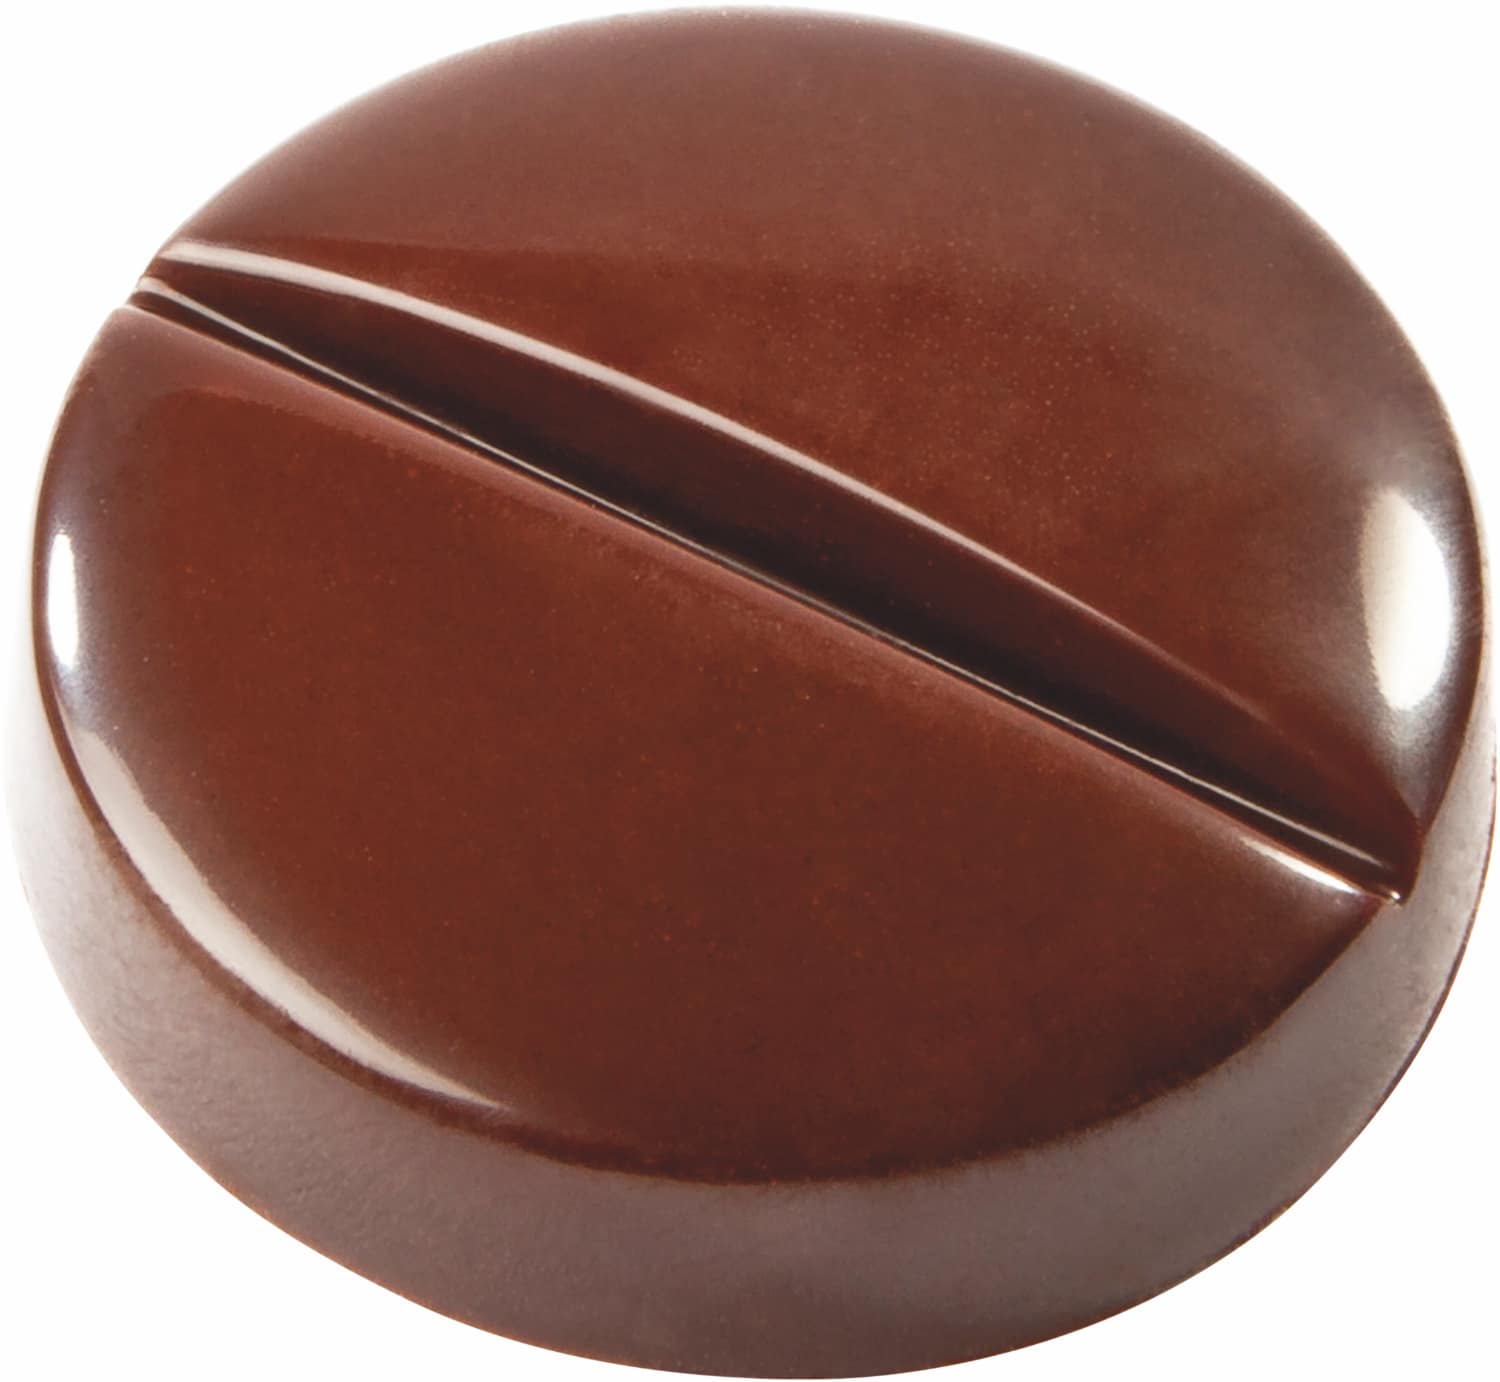 Chocolate mould "Biscuit" 421795